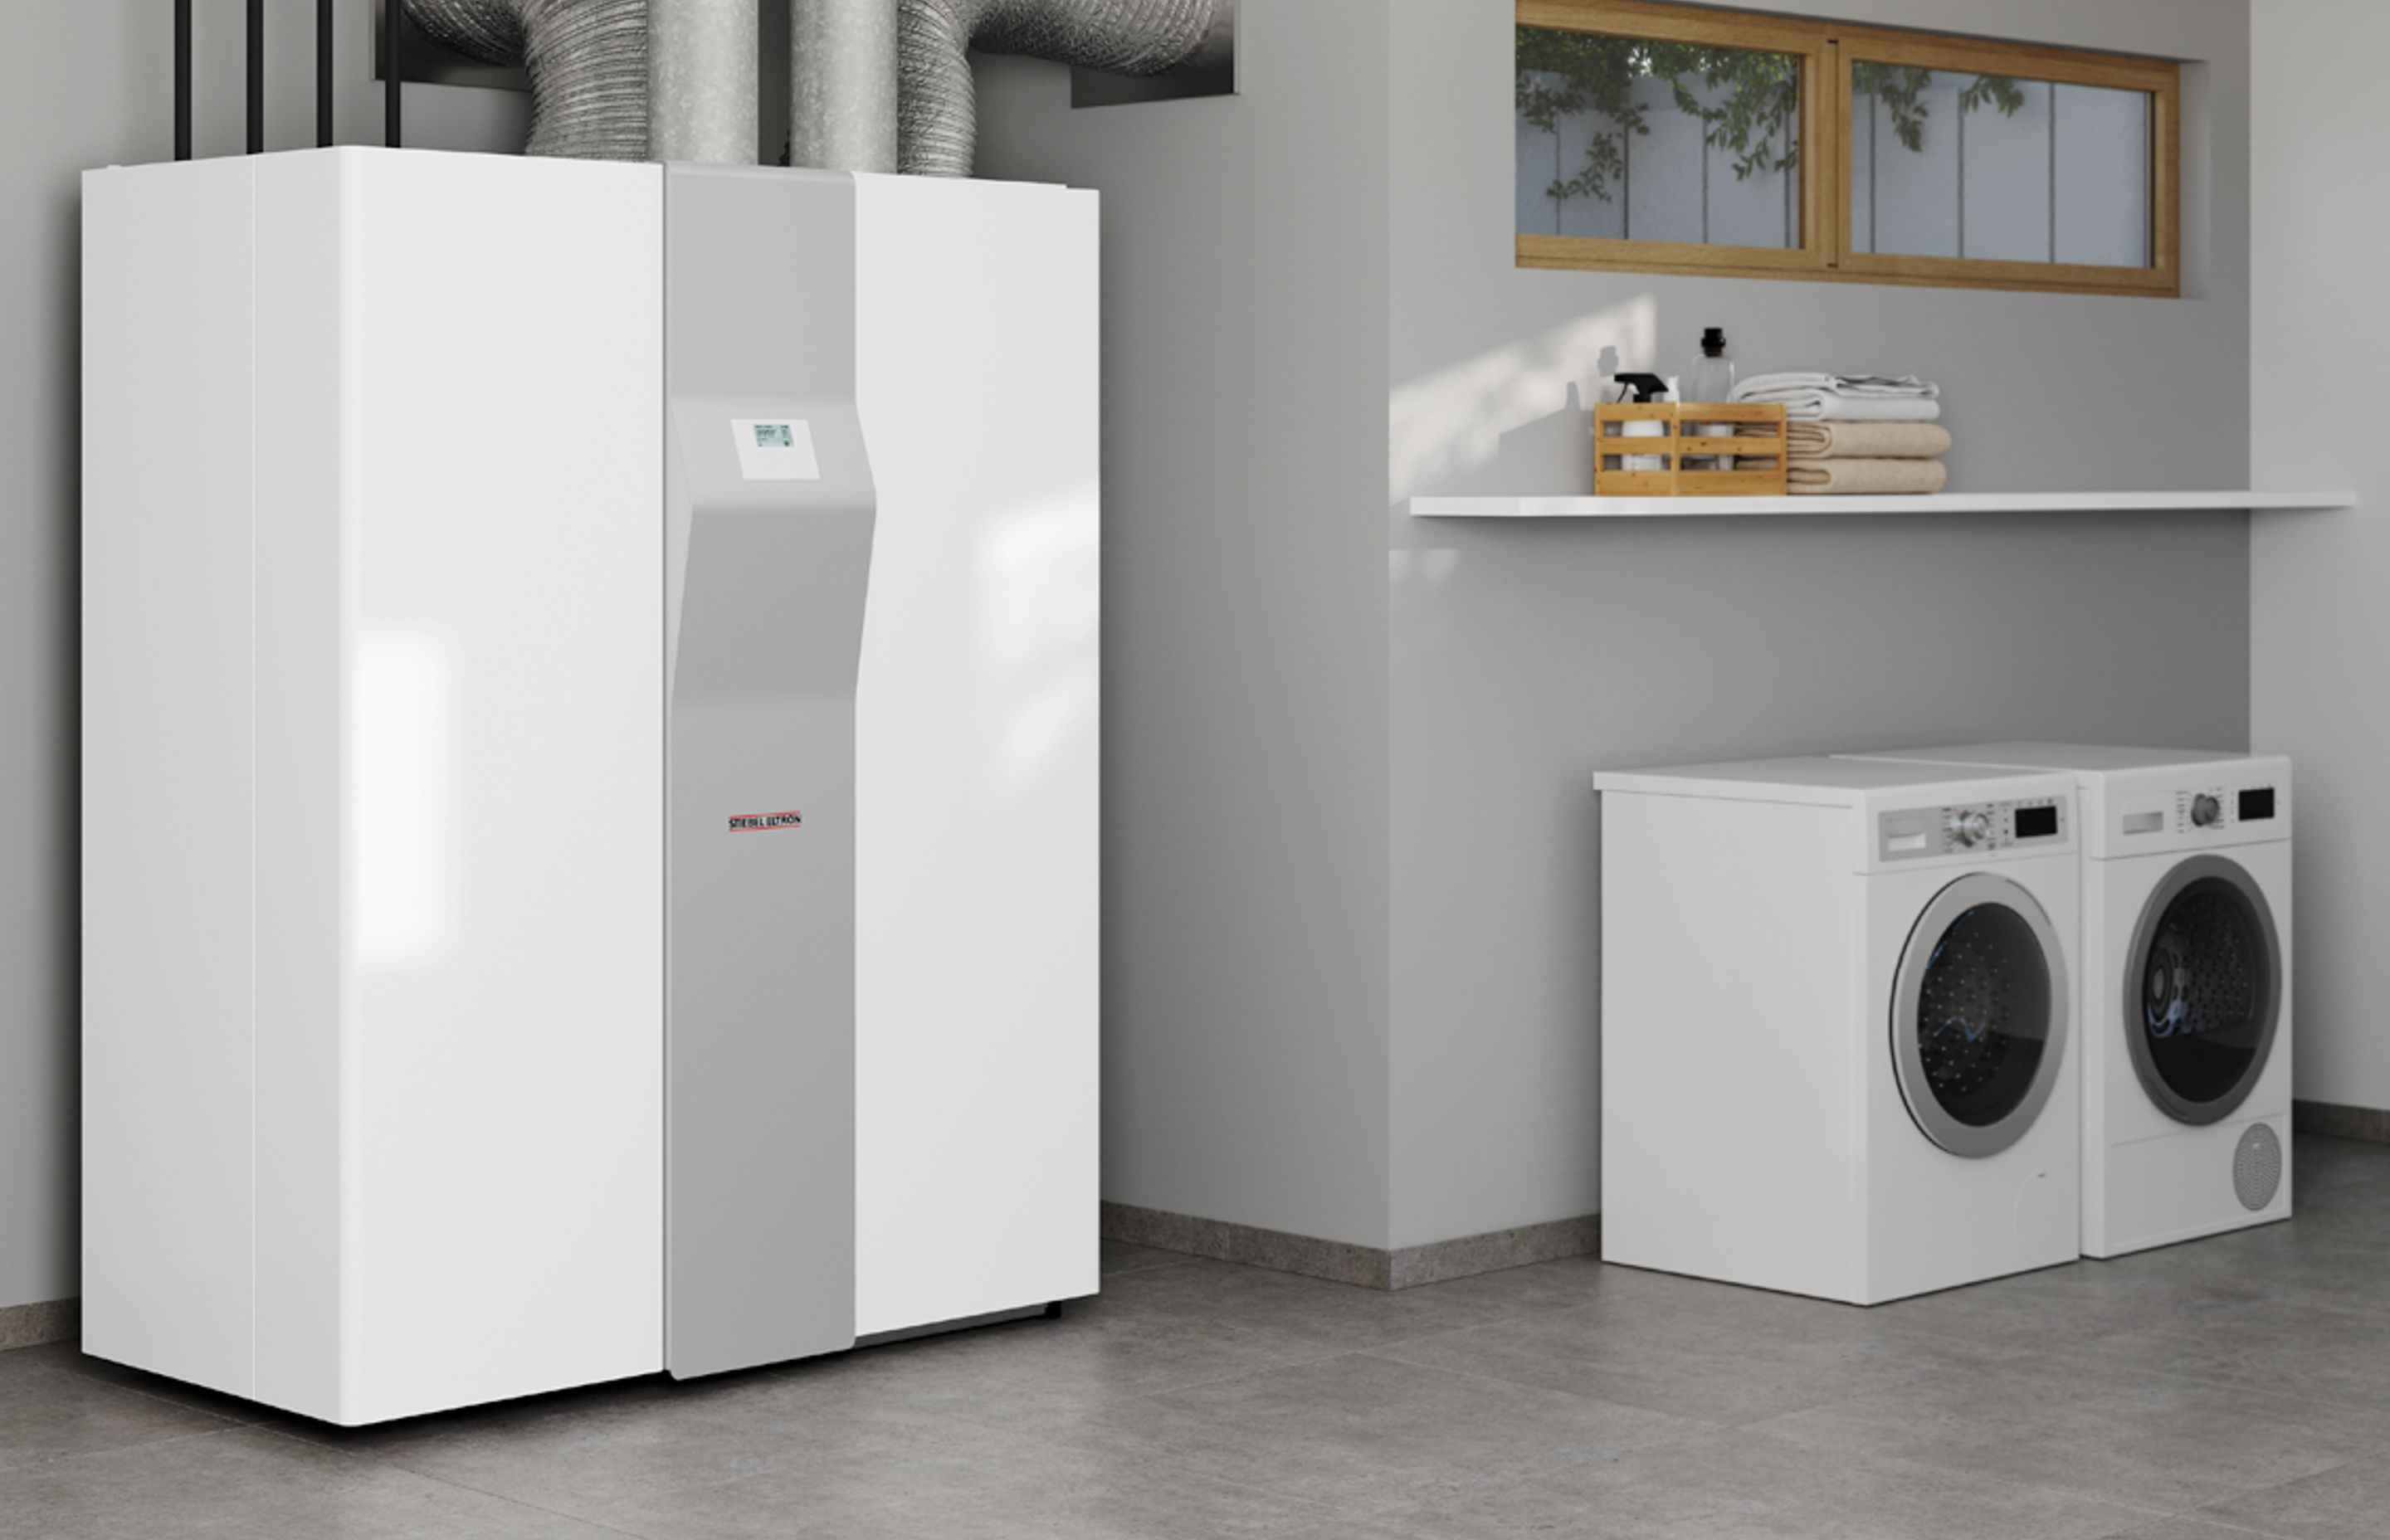 With a footprint less than 1.5 square meters, the Stiebel Eltron LWZ 8CS provides heating/cooling, hot water and ventilation services in one unit.